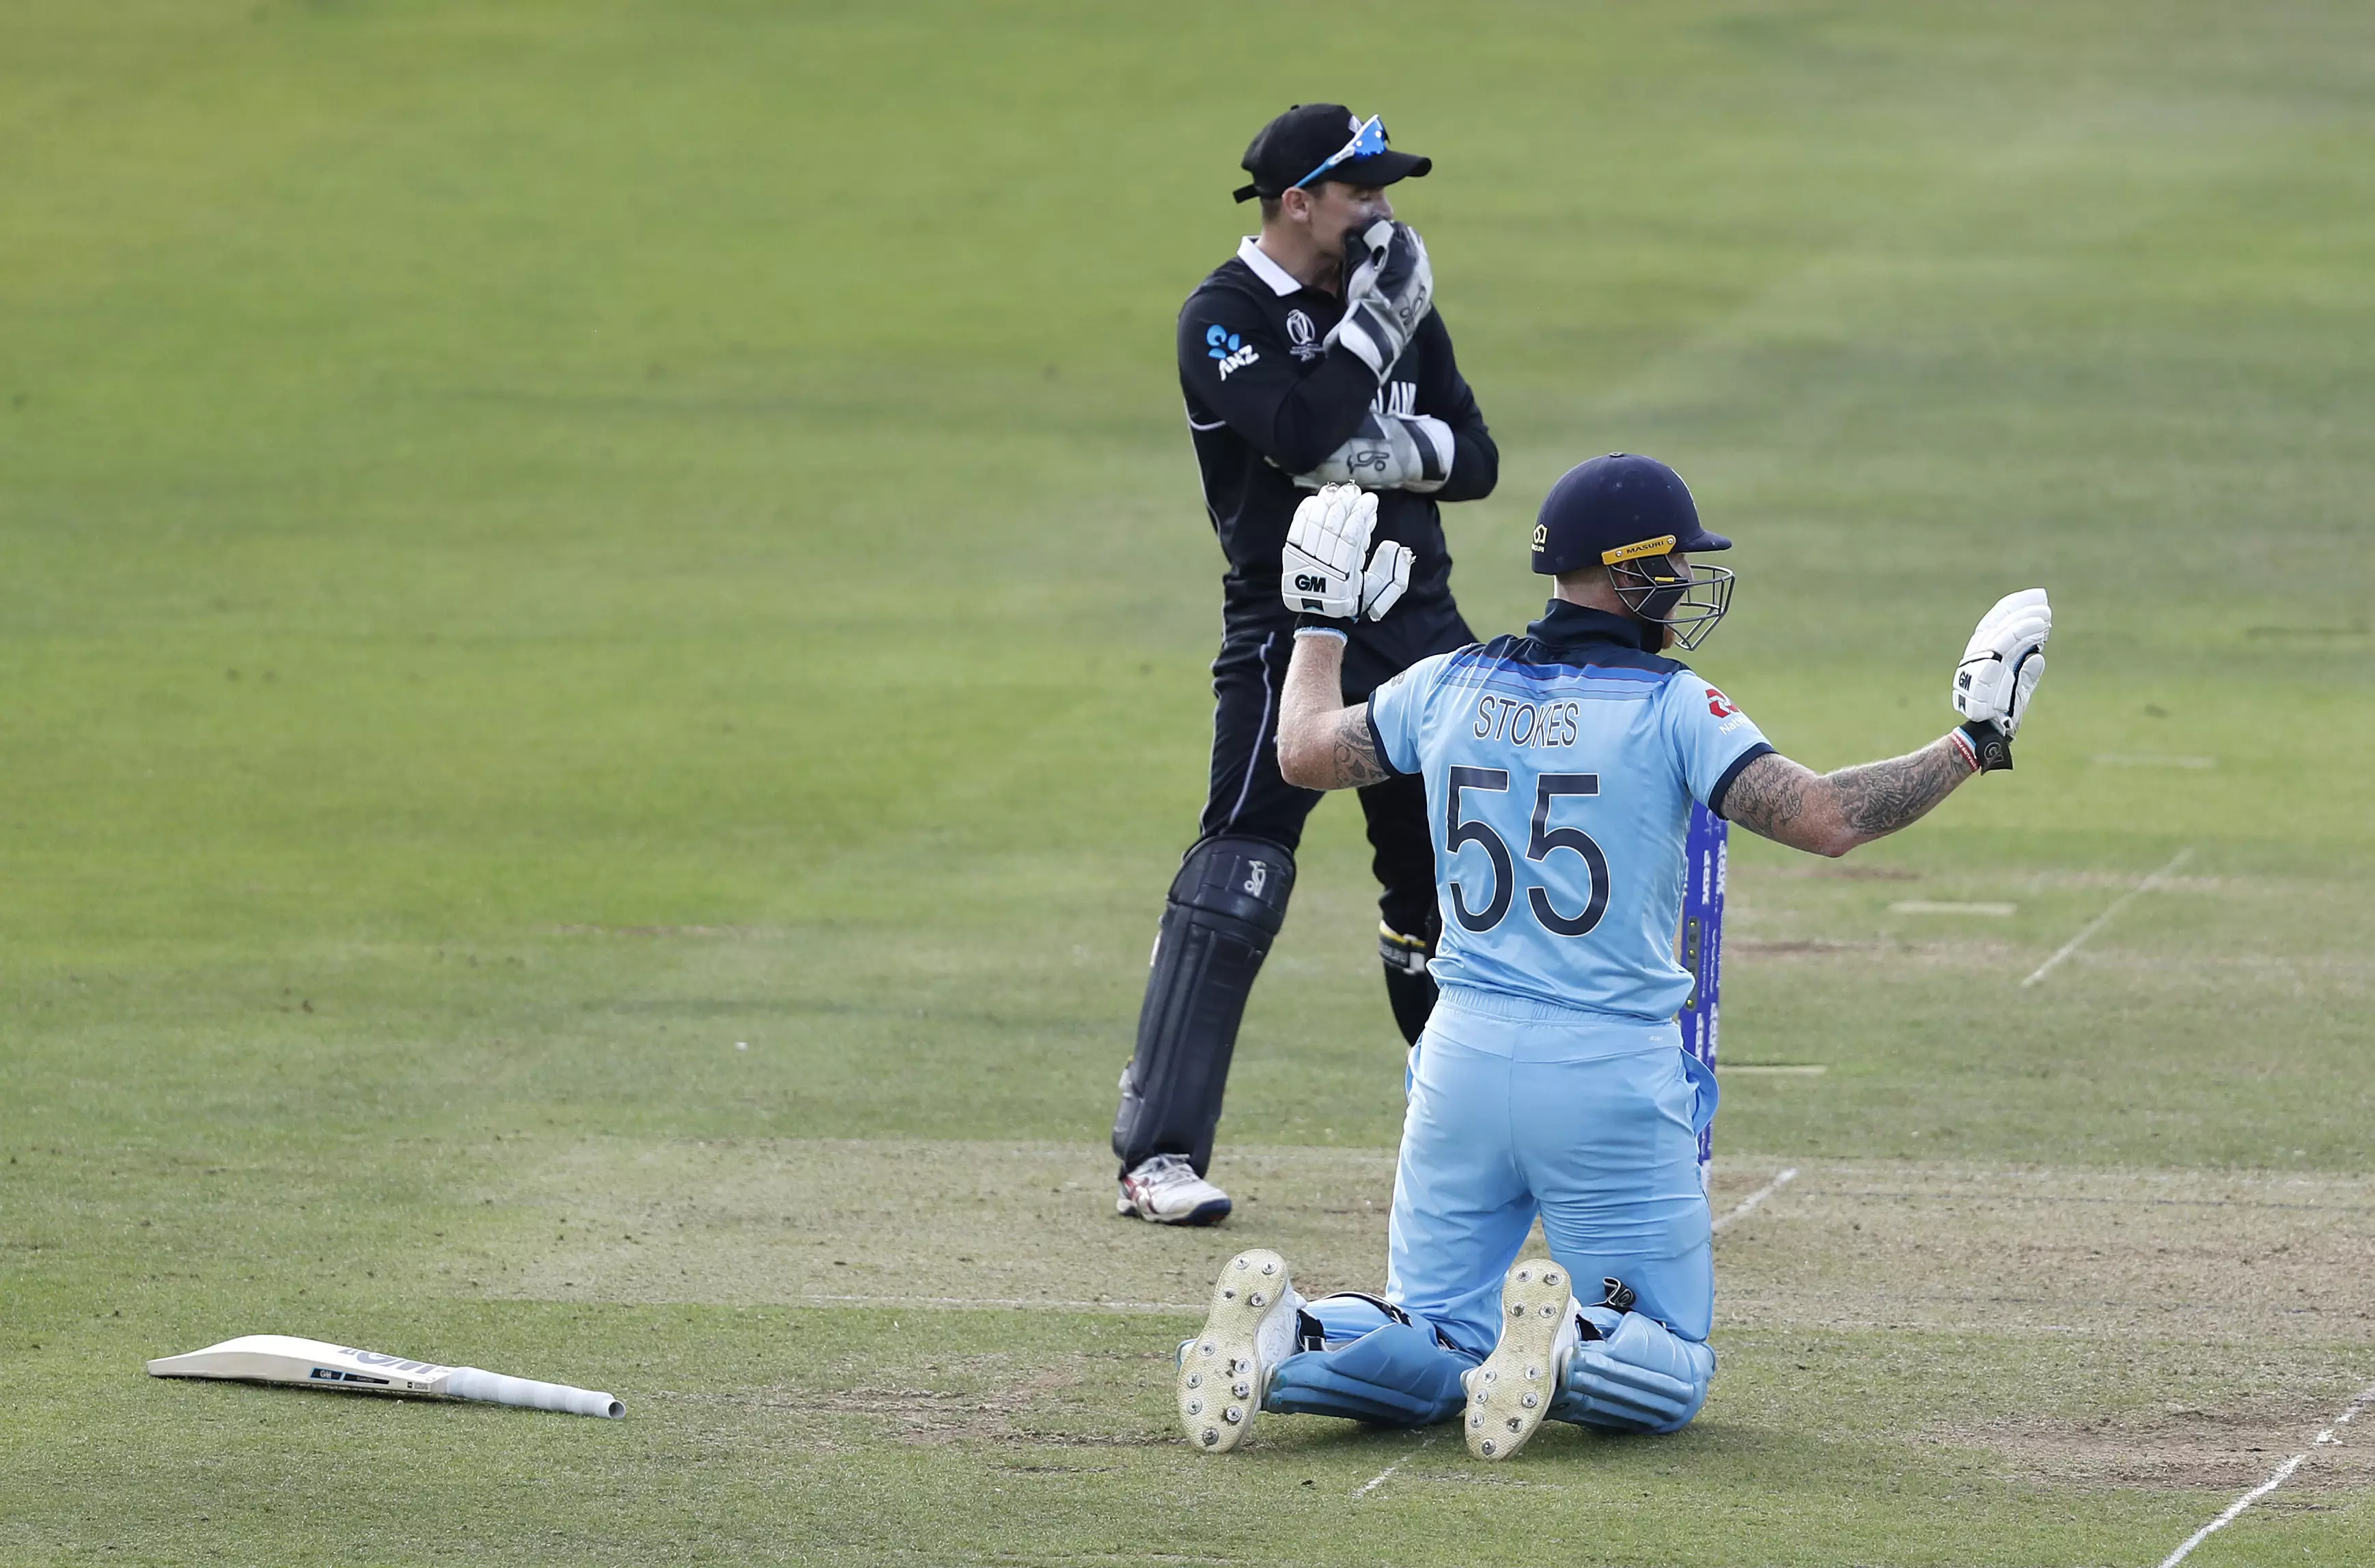 Stokes apologises following his fortunate six. Image: PA Images 